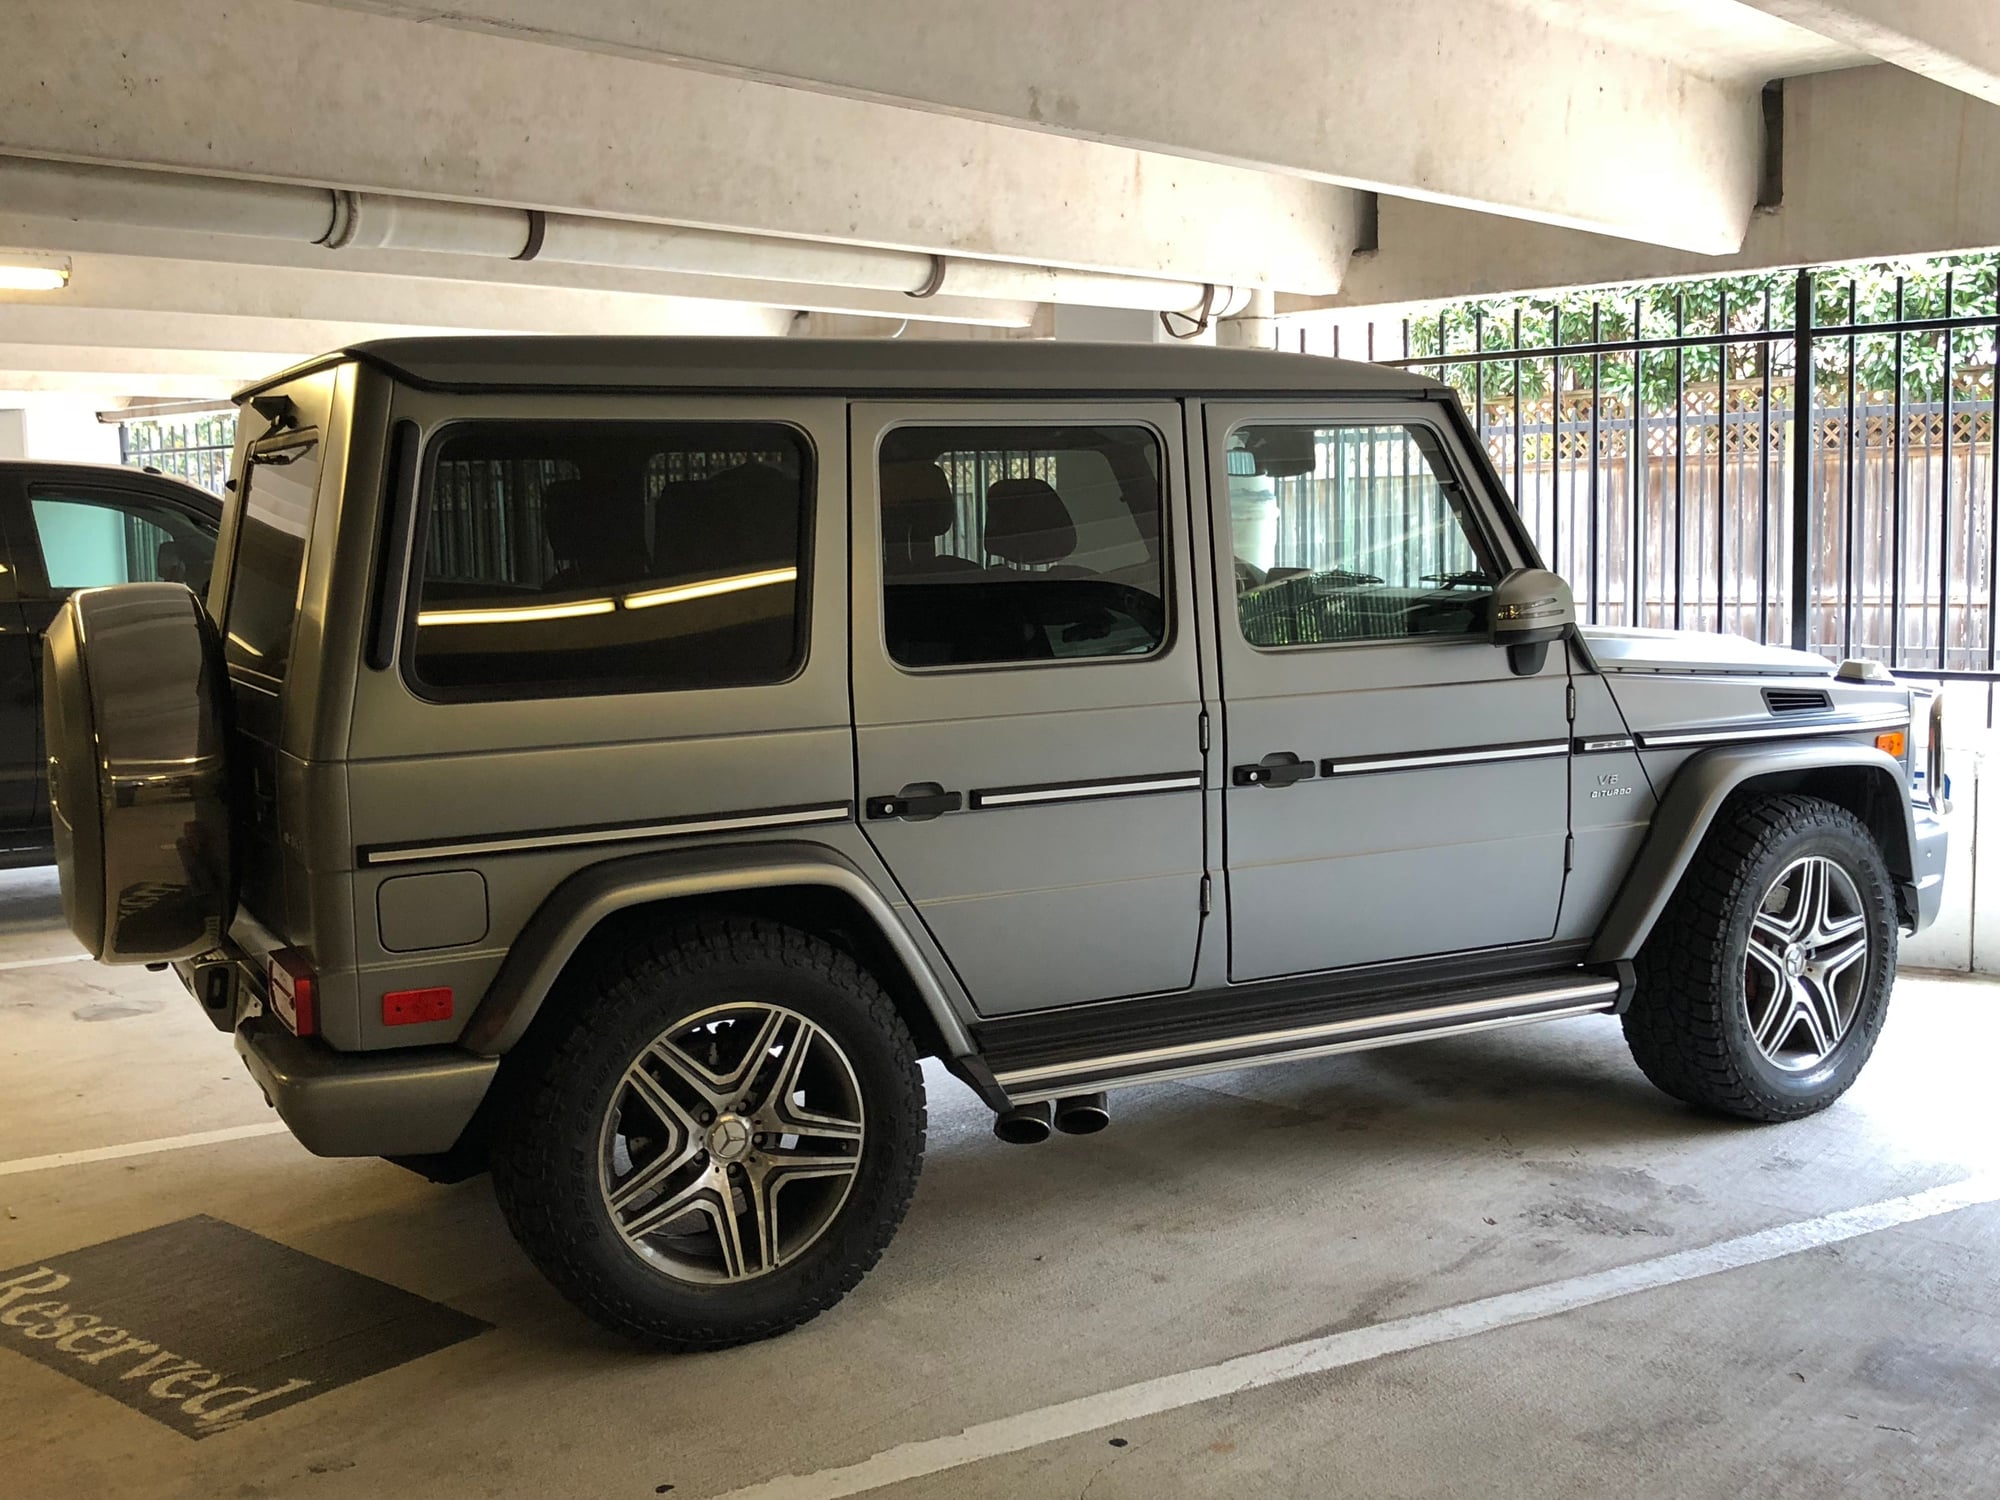 Exterior Body Parts - 2013-2018 G63 ( and others) parts for sale - grille, rims/tires brush guard etc - Used - 2013 to 2018 Mercedes-Benz G63 AMG - Houston, TX 77056, United States